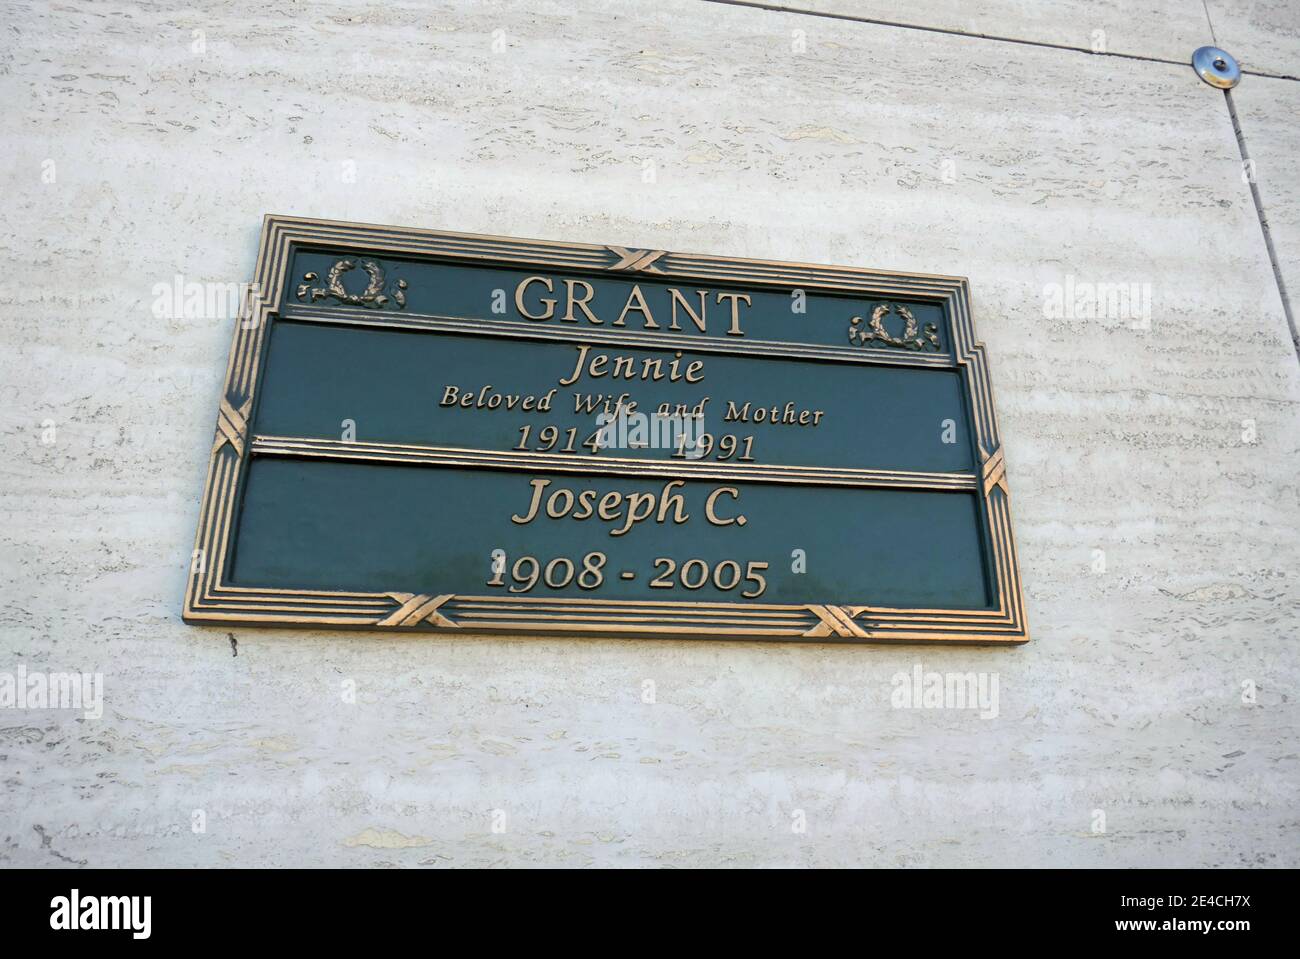 Glendale, California, USA 18th January 2021 A general view of atmosphere of artist Joe Grant's Grave at Forest Lawn Memorial Park on January 18, 2021 in Glendale, California, USA. Photo by Barry King/Alamy Stock Photo Stock Photo